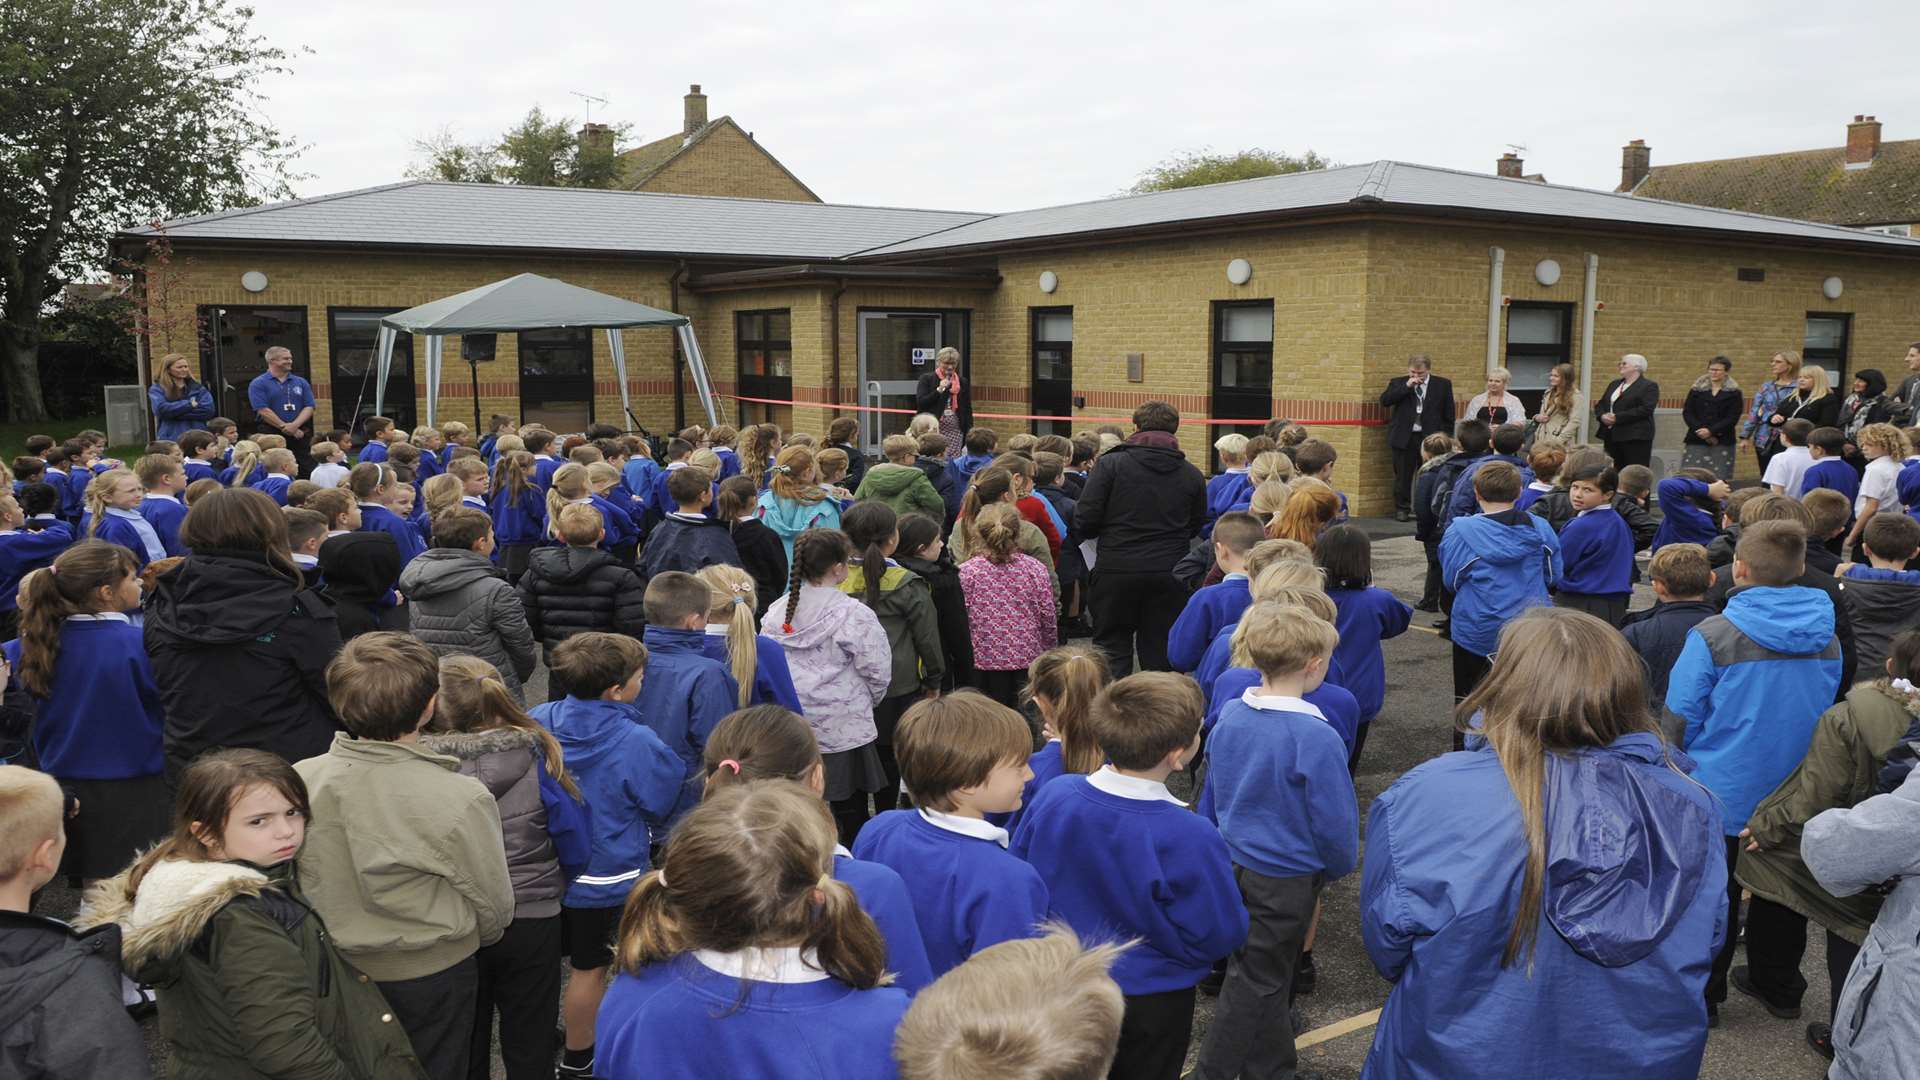 New school annex opened by chairman of governors George Box